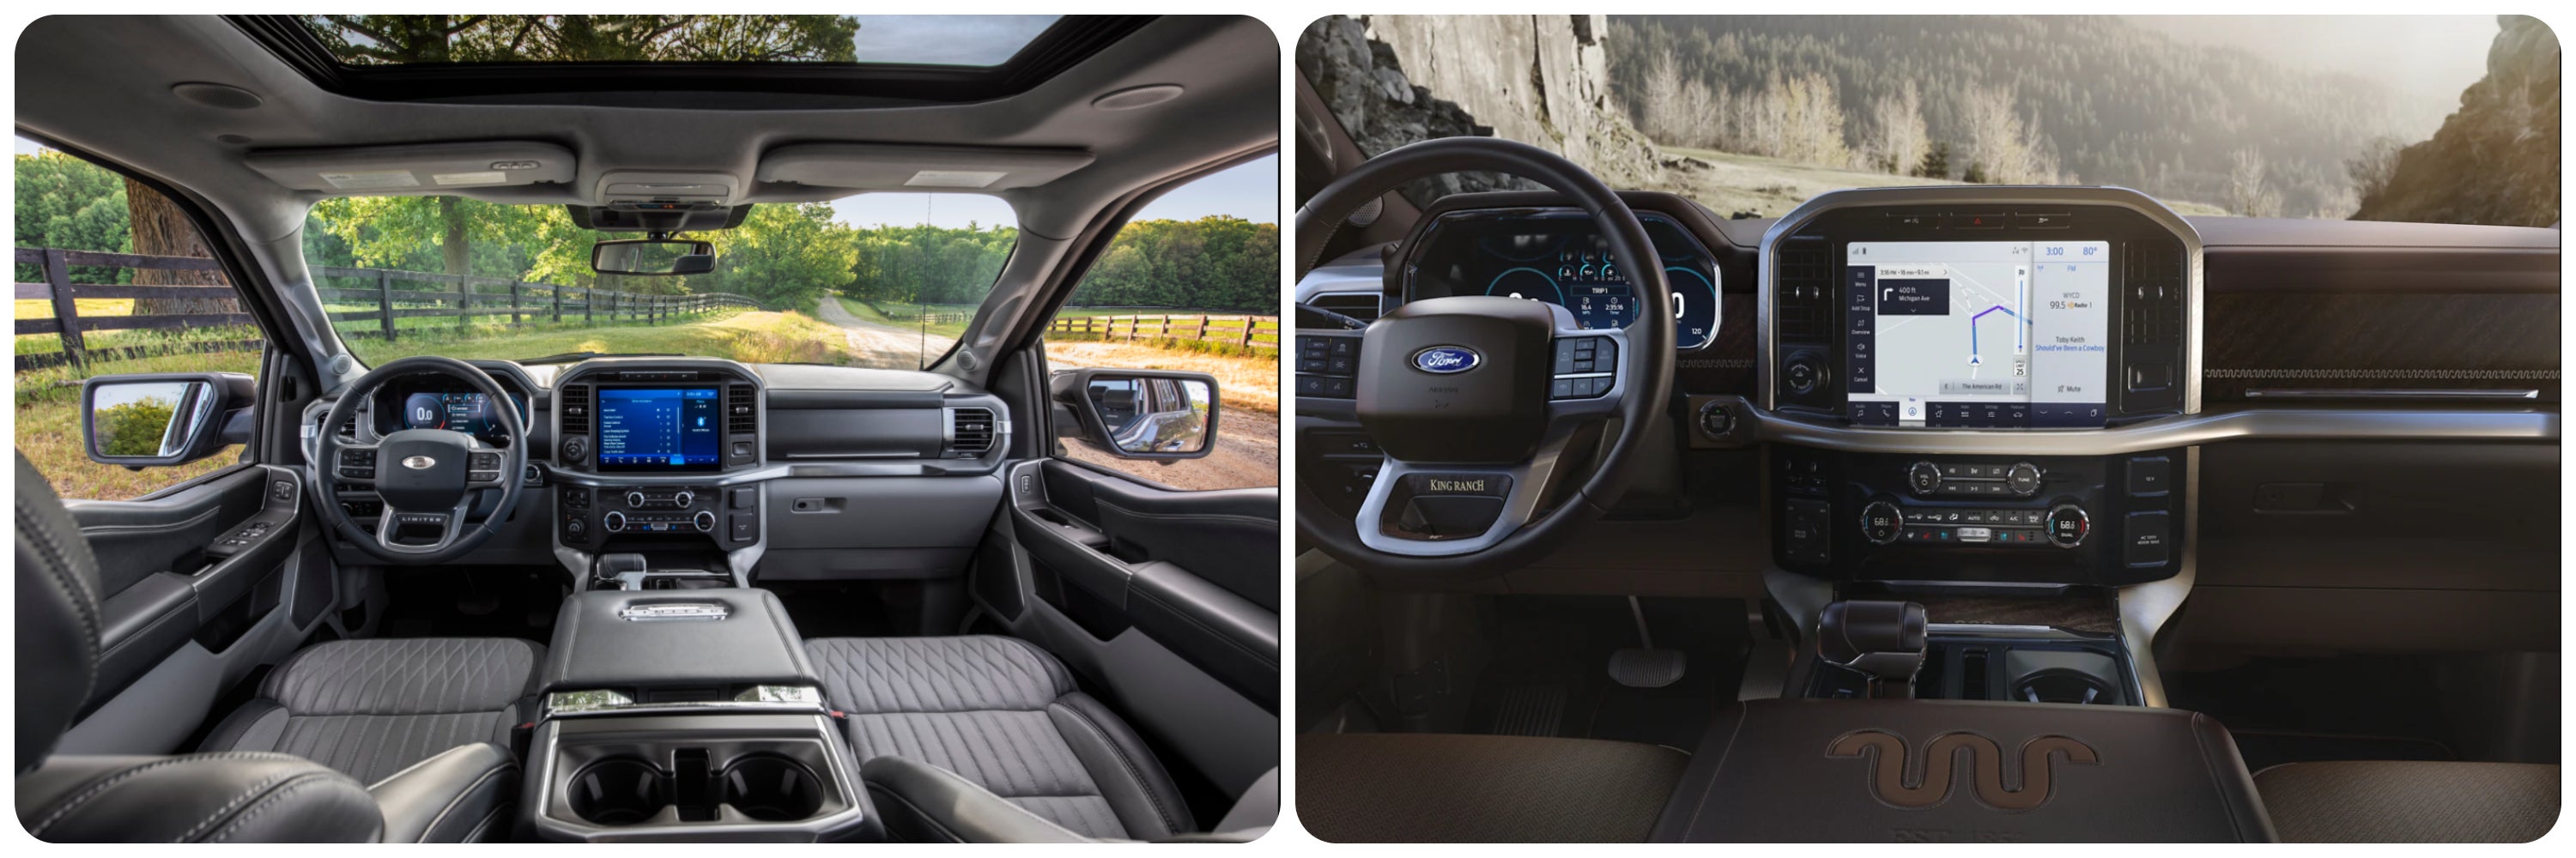 On the right, an all gray interior with leather seats cabin of a 2022 Ford F150 with digital dash and touchscreen infotainment center. On the right the interior brown and leather cabin of a King Ranch 2021 Ford F150 with digital dash and touchscreen infotainment center in the middle of the dash